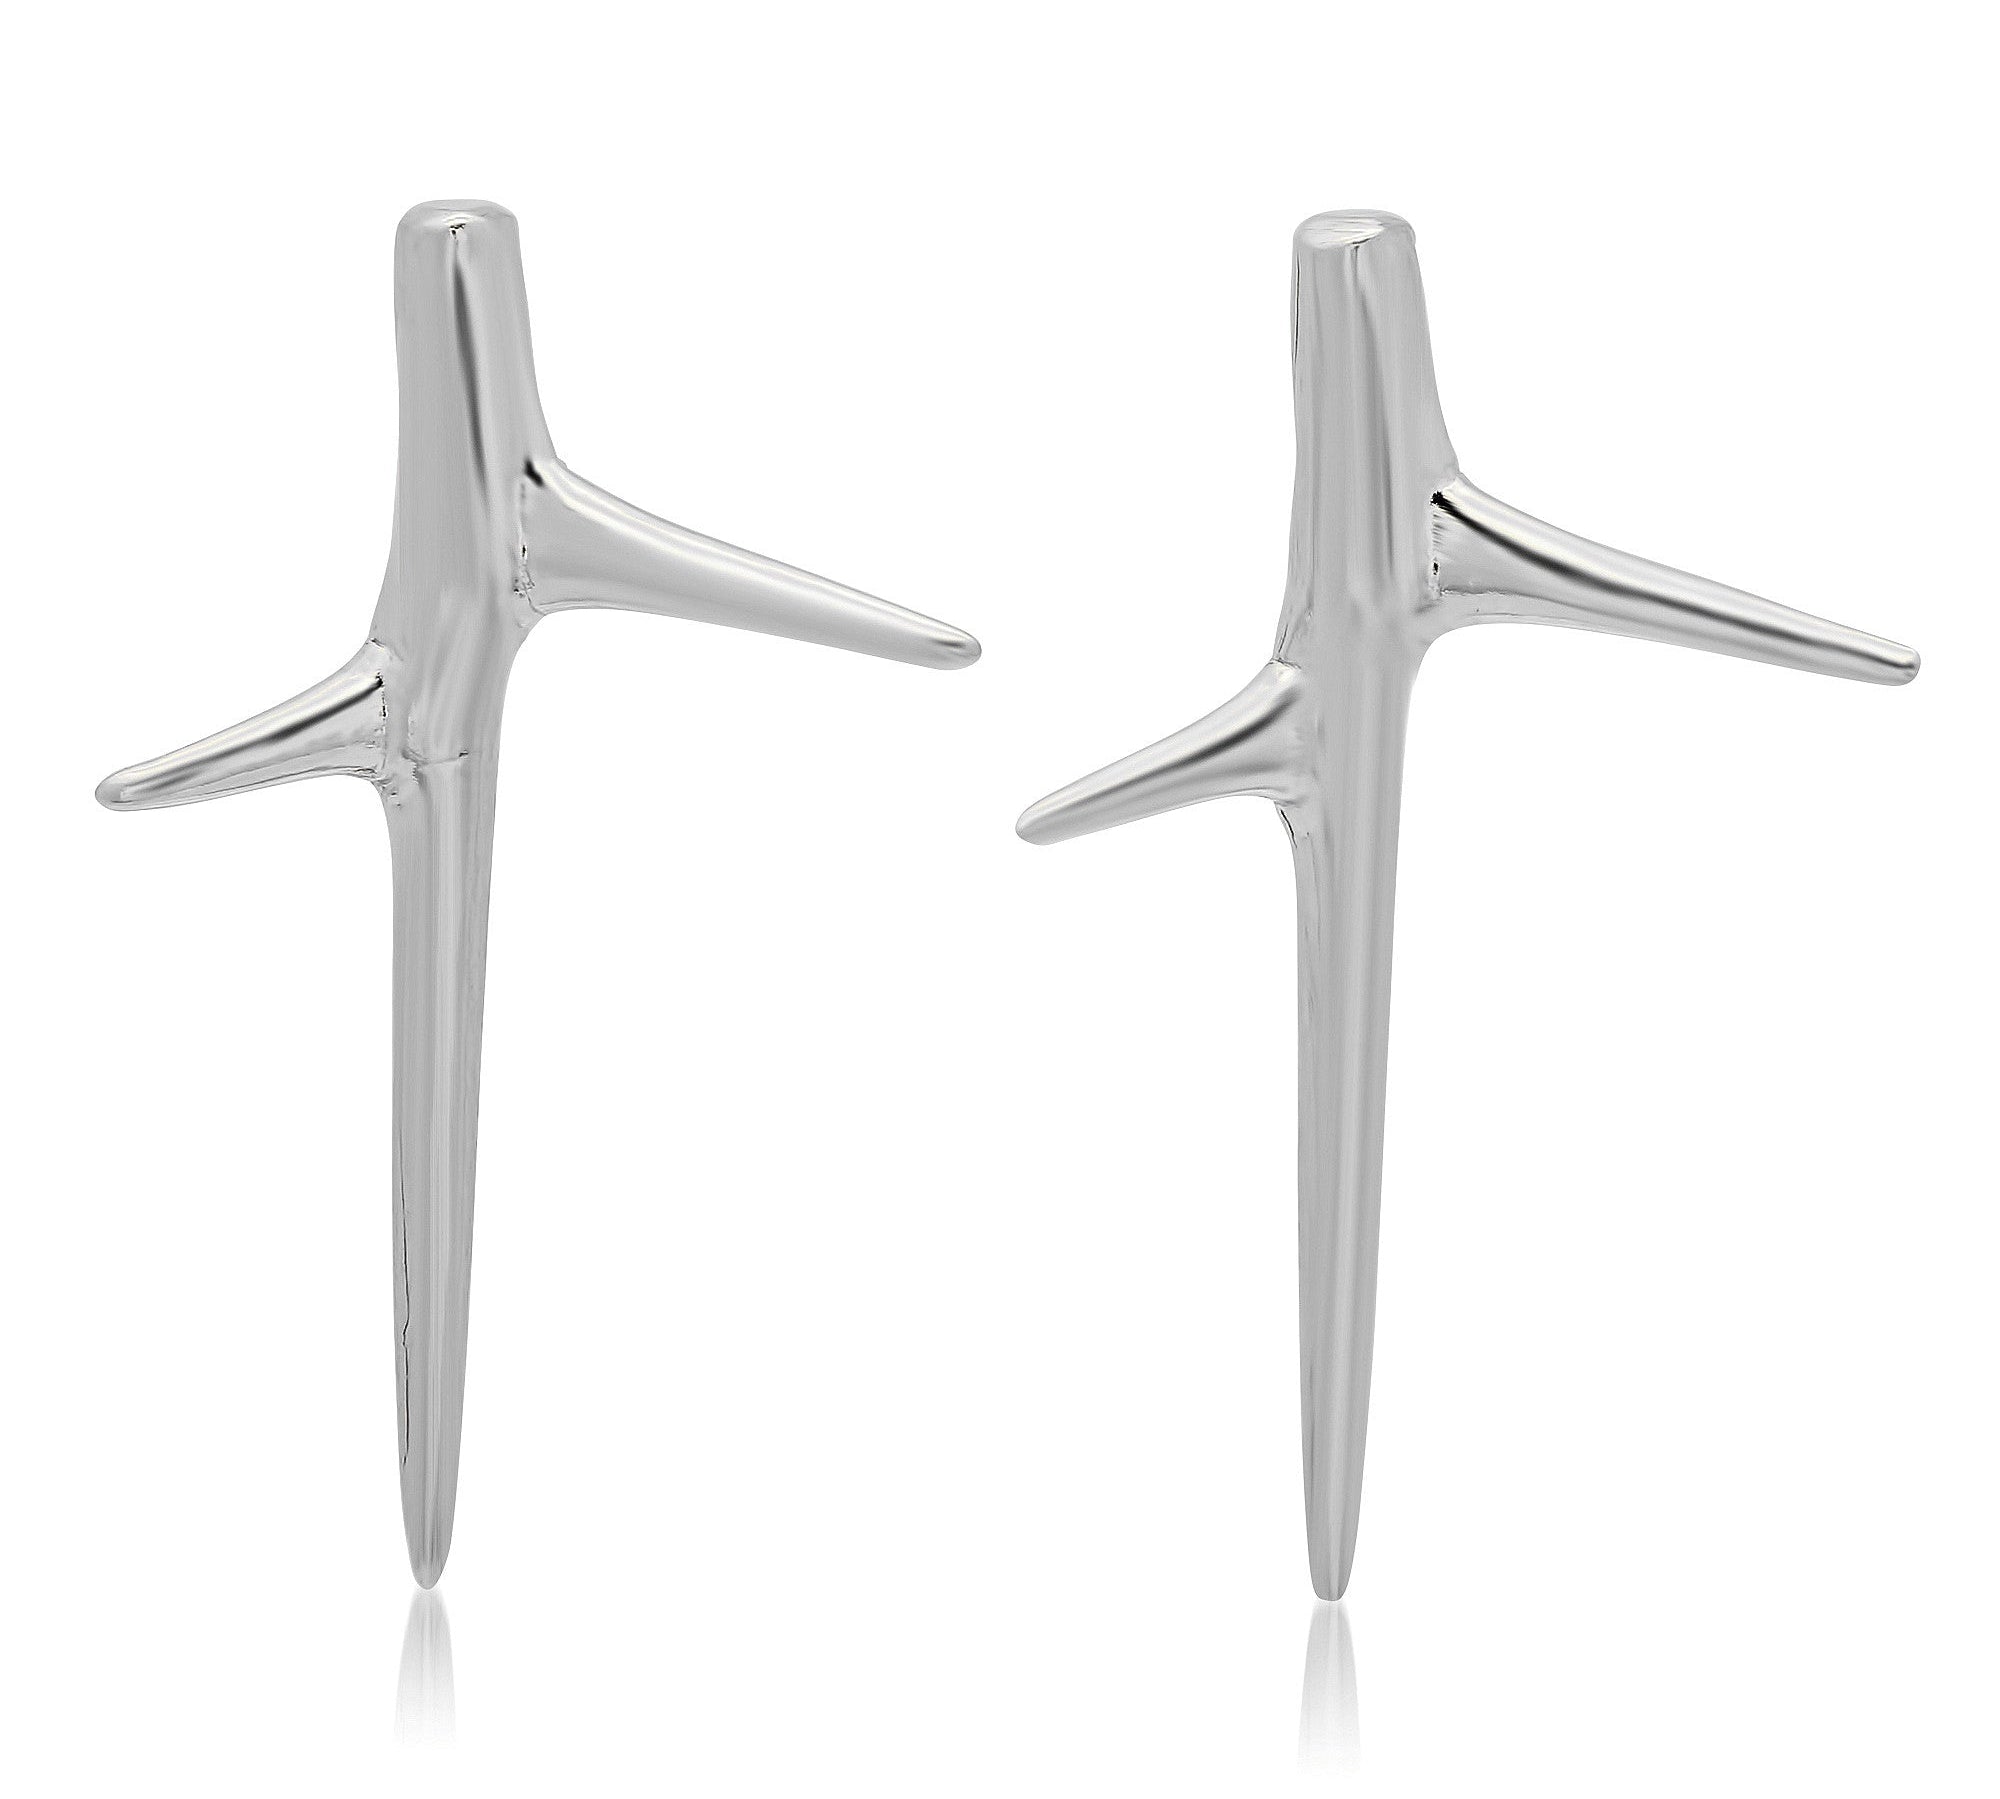 Thorn Studs Stud Earrings Elisabeth Bell Jewelry White Gold  